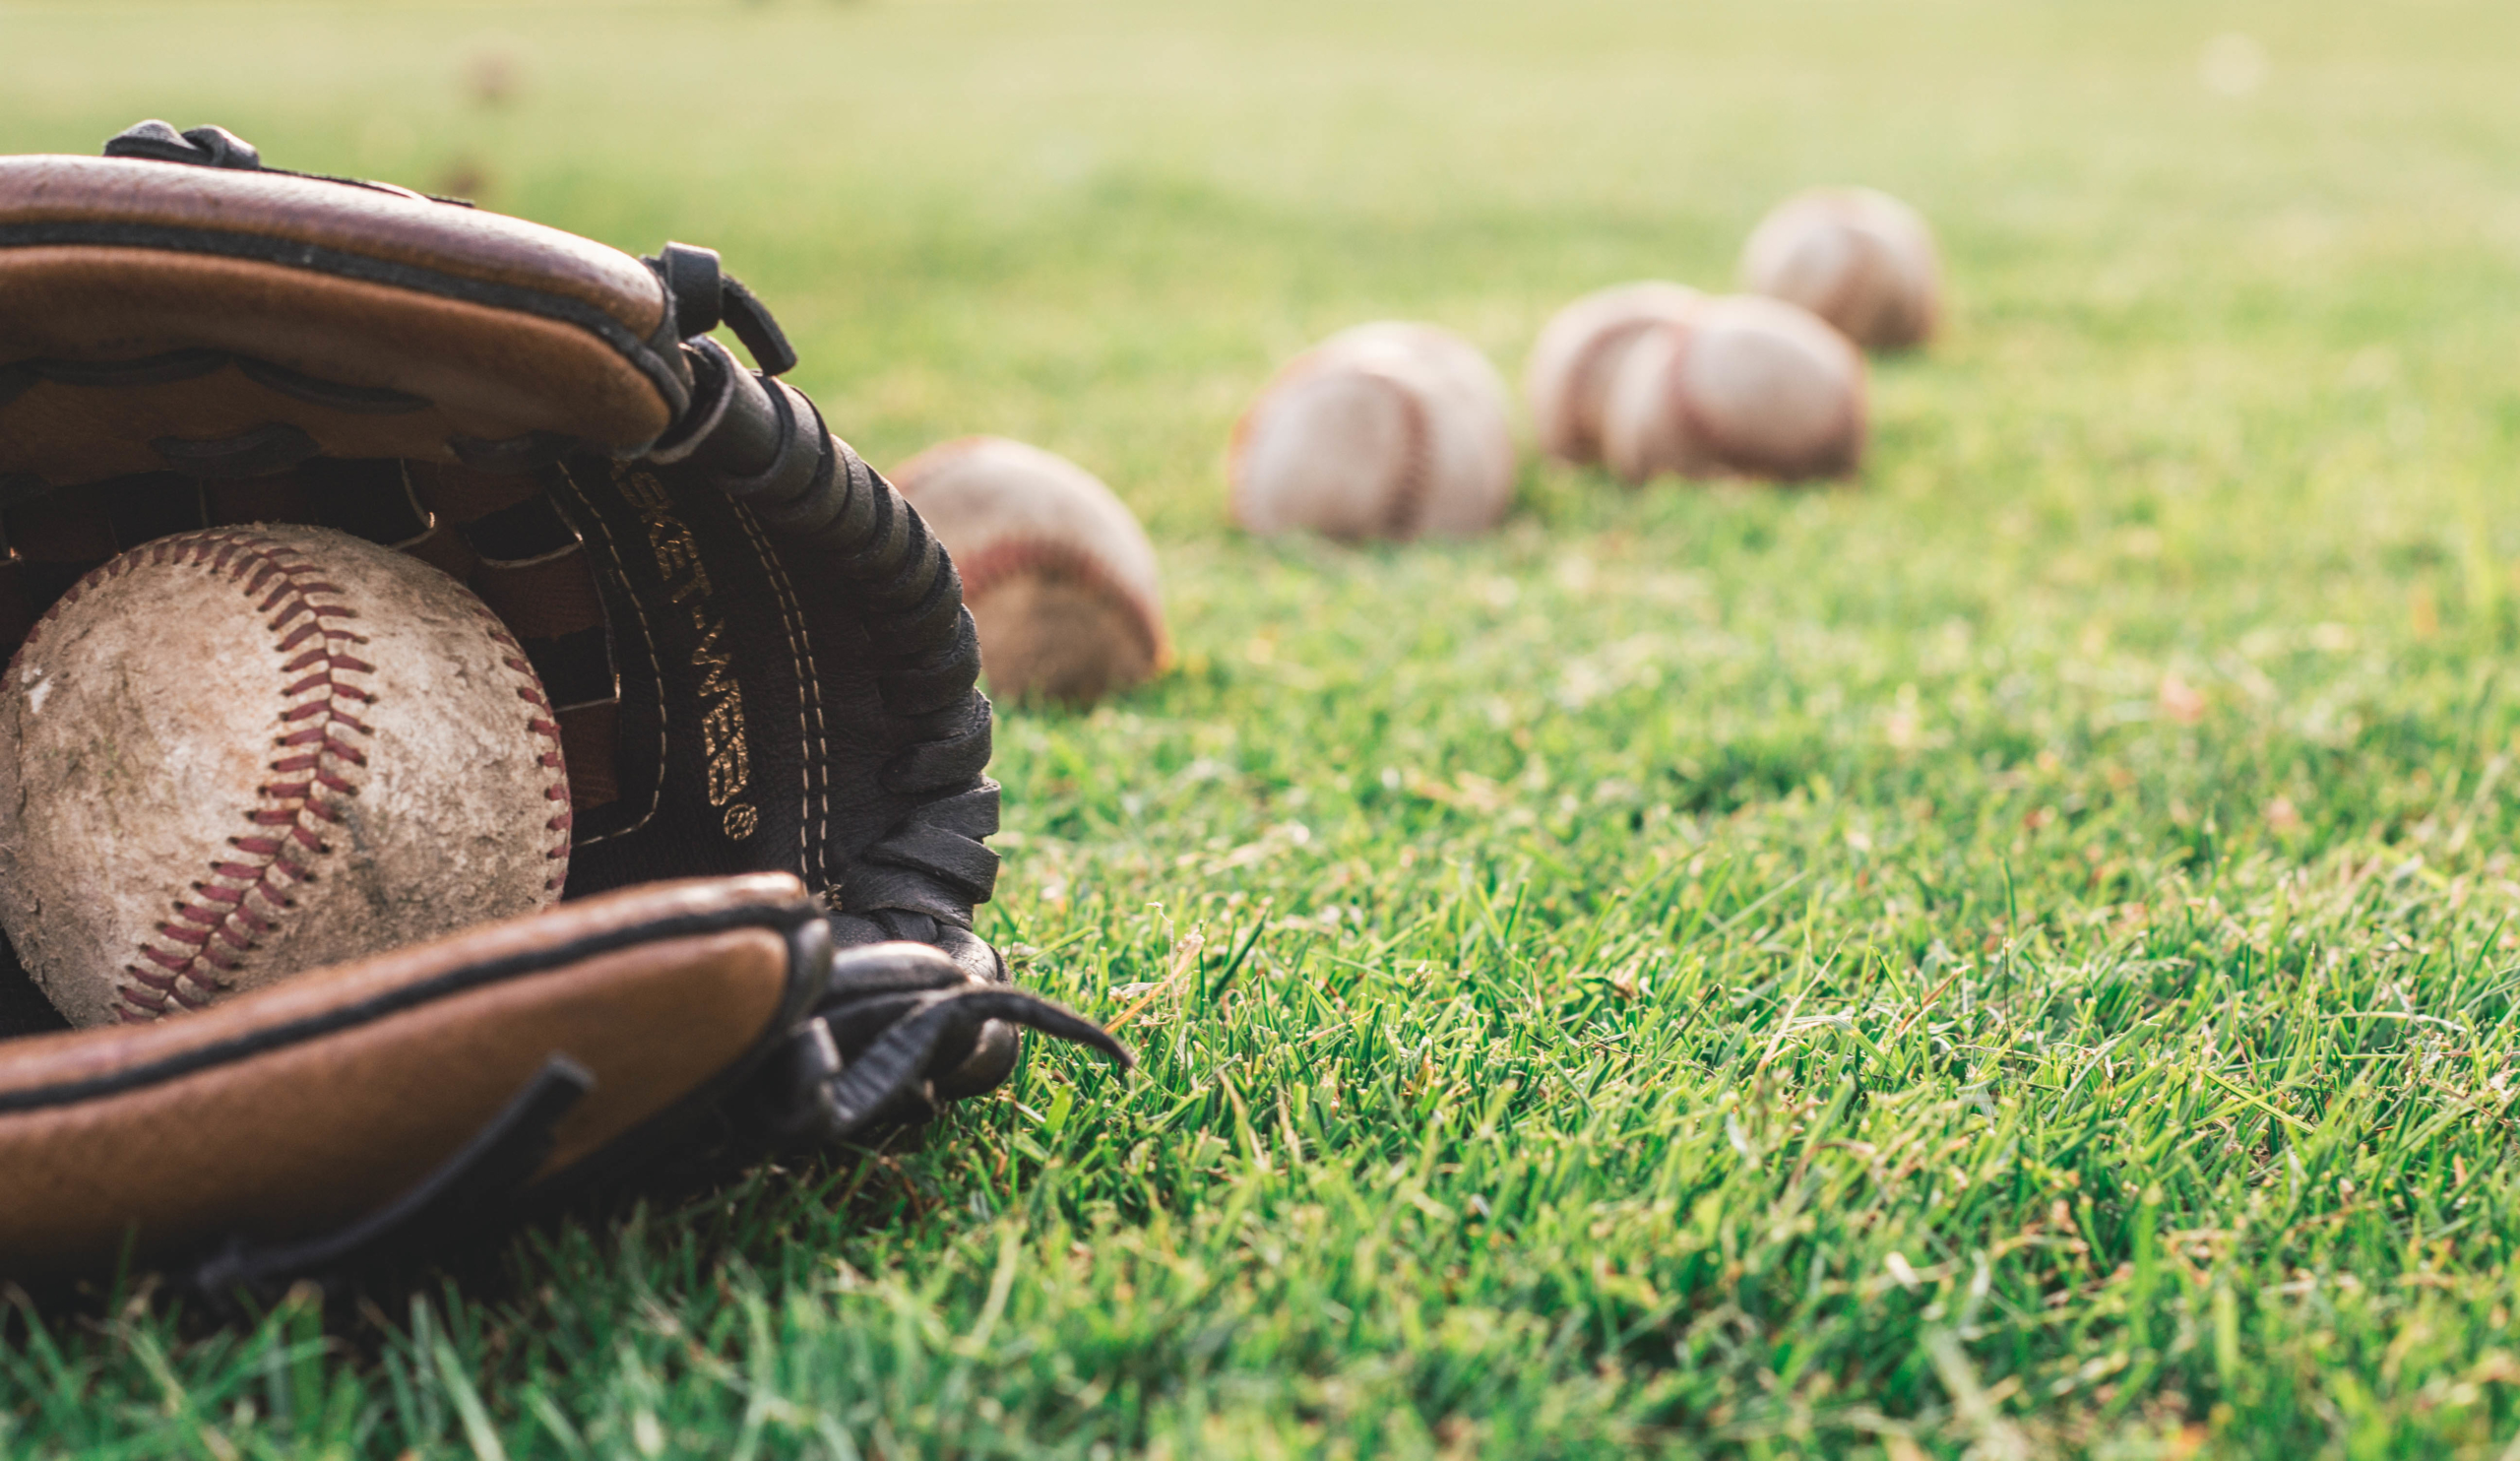 Considerations For Youth Baseball During COVID-19